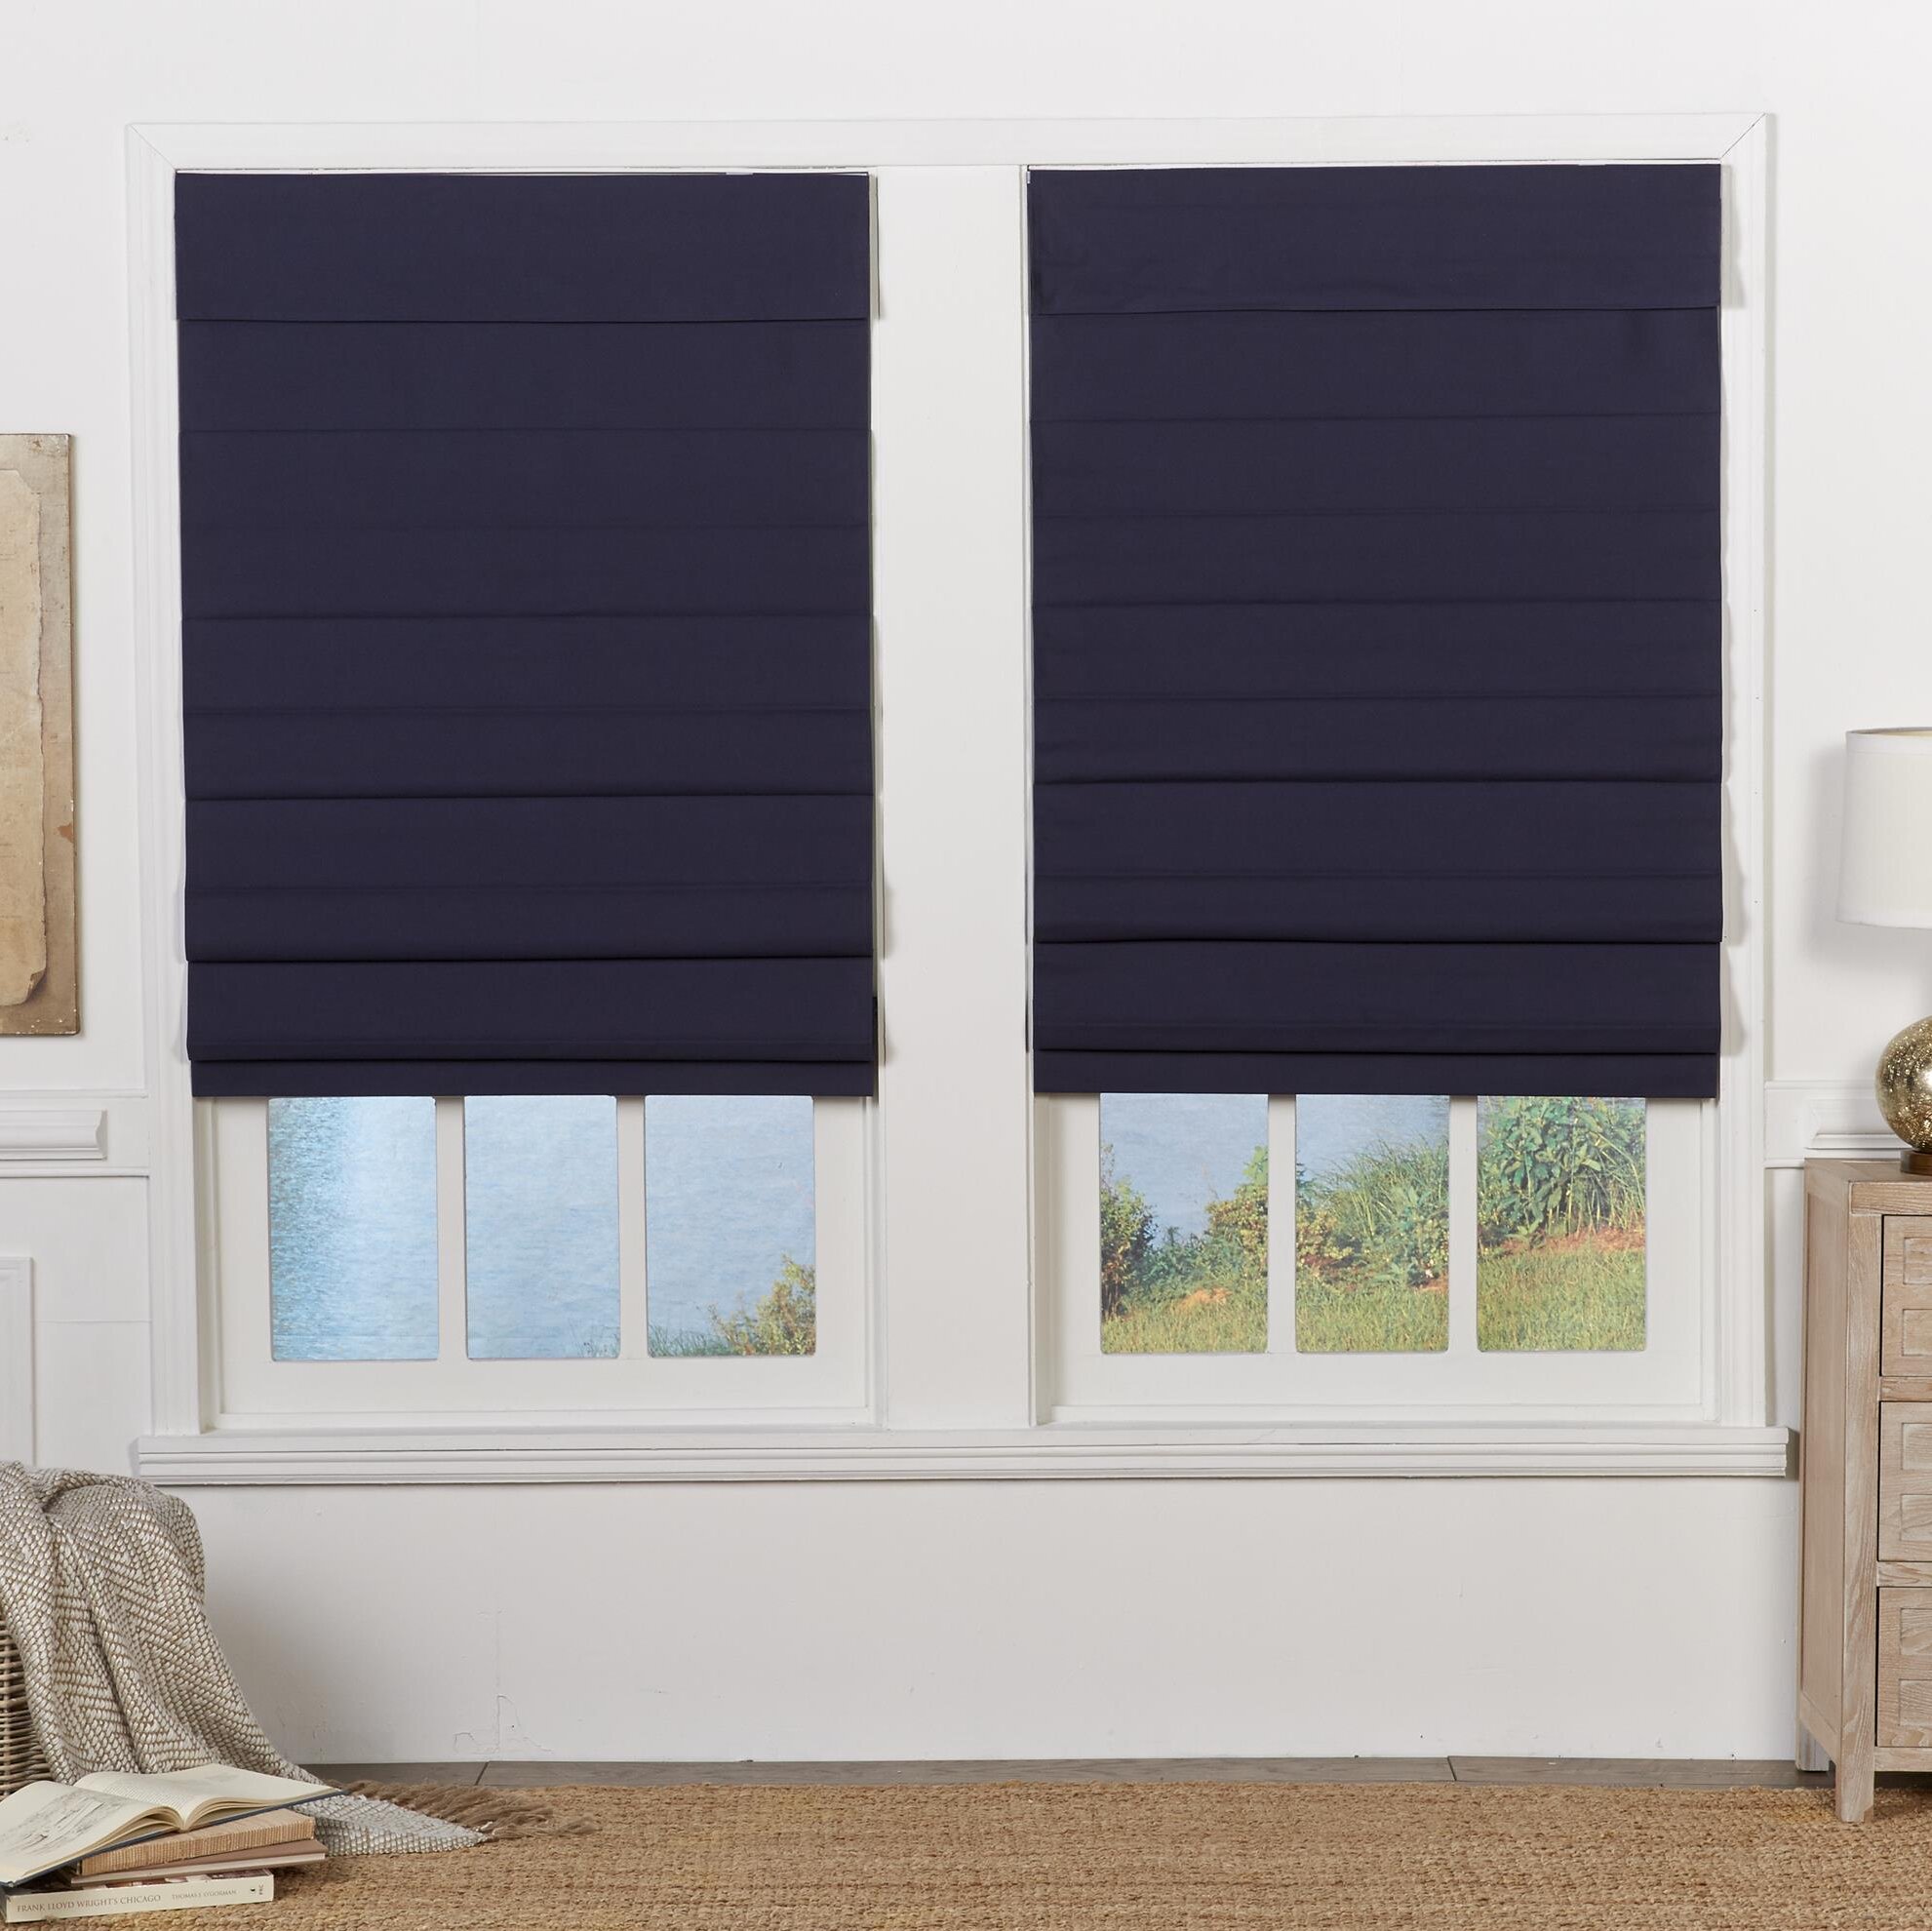 ChadMade Customize Neutral Trellis Roman Shade Blue Blackout Light Filtering Roman Shade Blinds for Bedroom Window French Door Small Window Faux Linen Thea Collecction Install Hardware Included